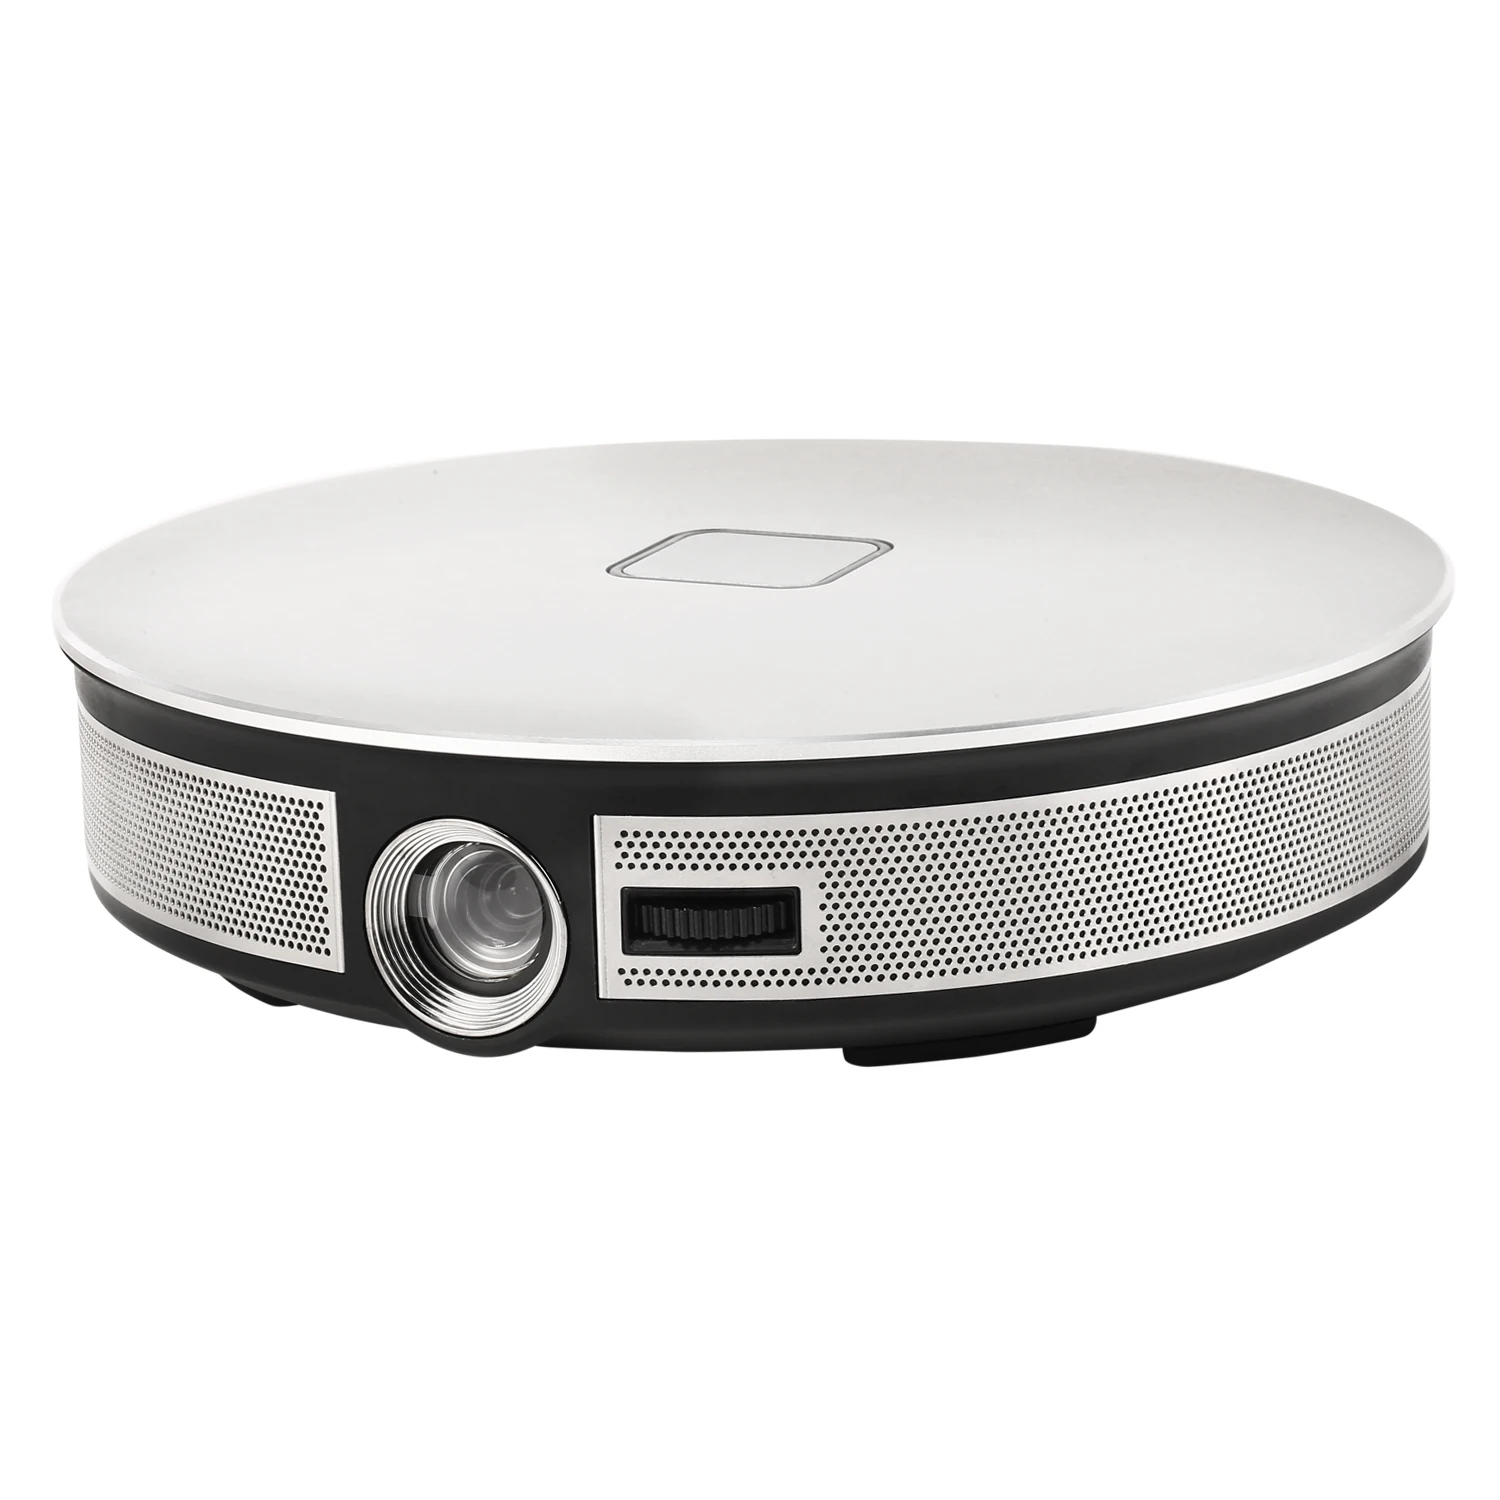 LED Android 6 Smart Mini Projector support 4K Decoding and 3D LTP-D8S